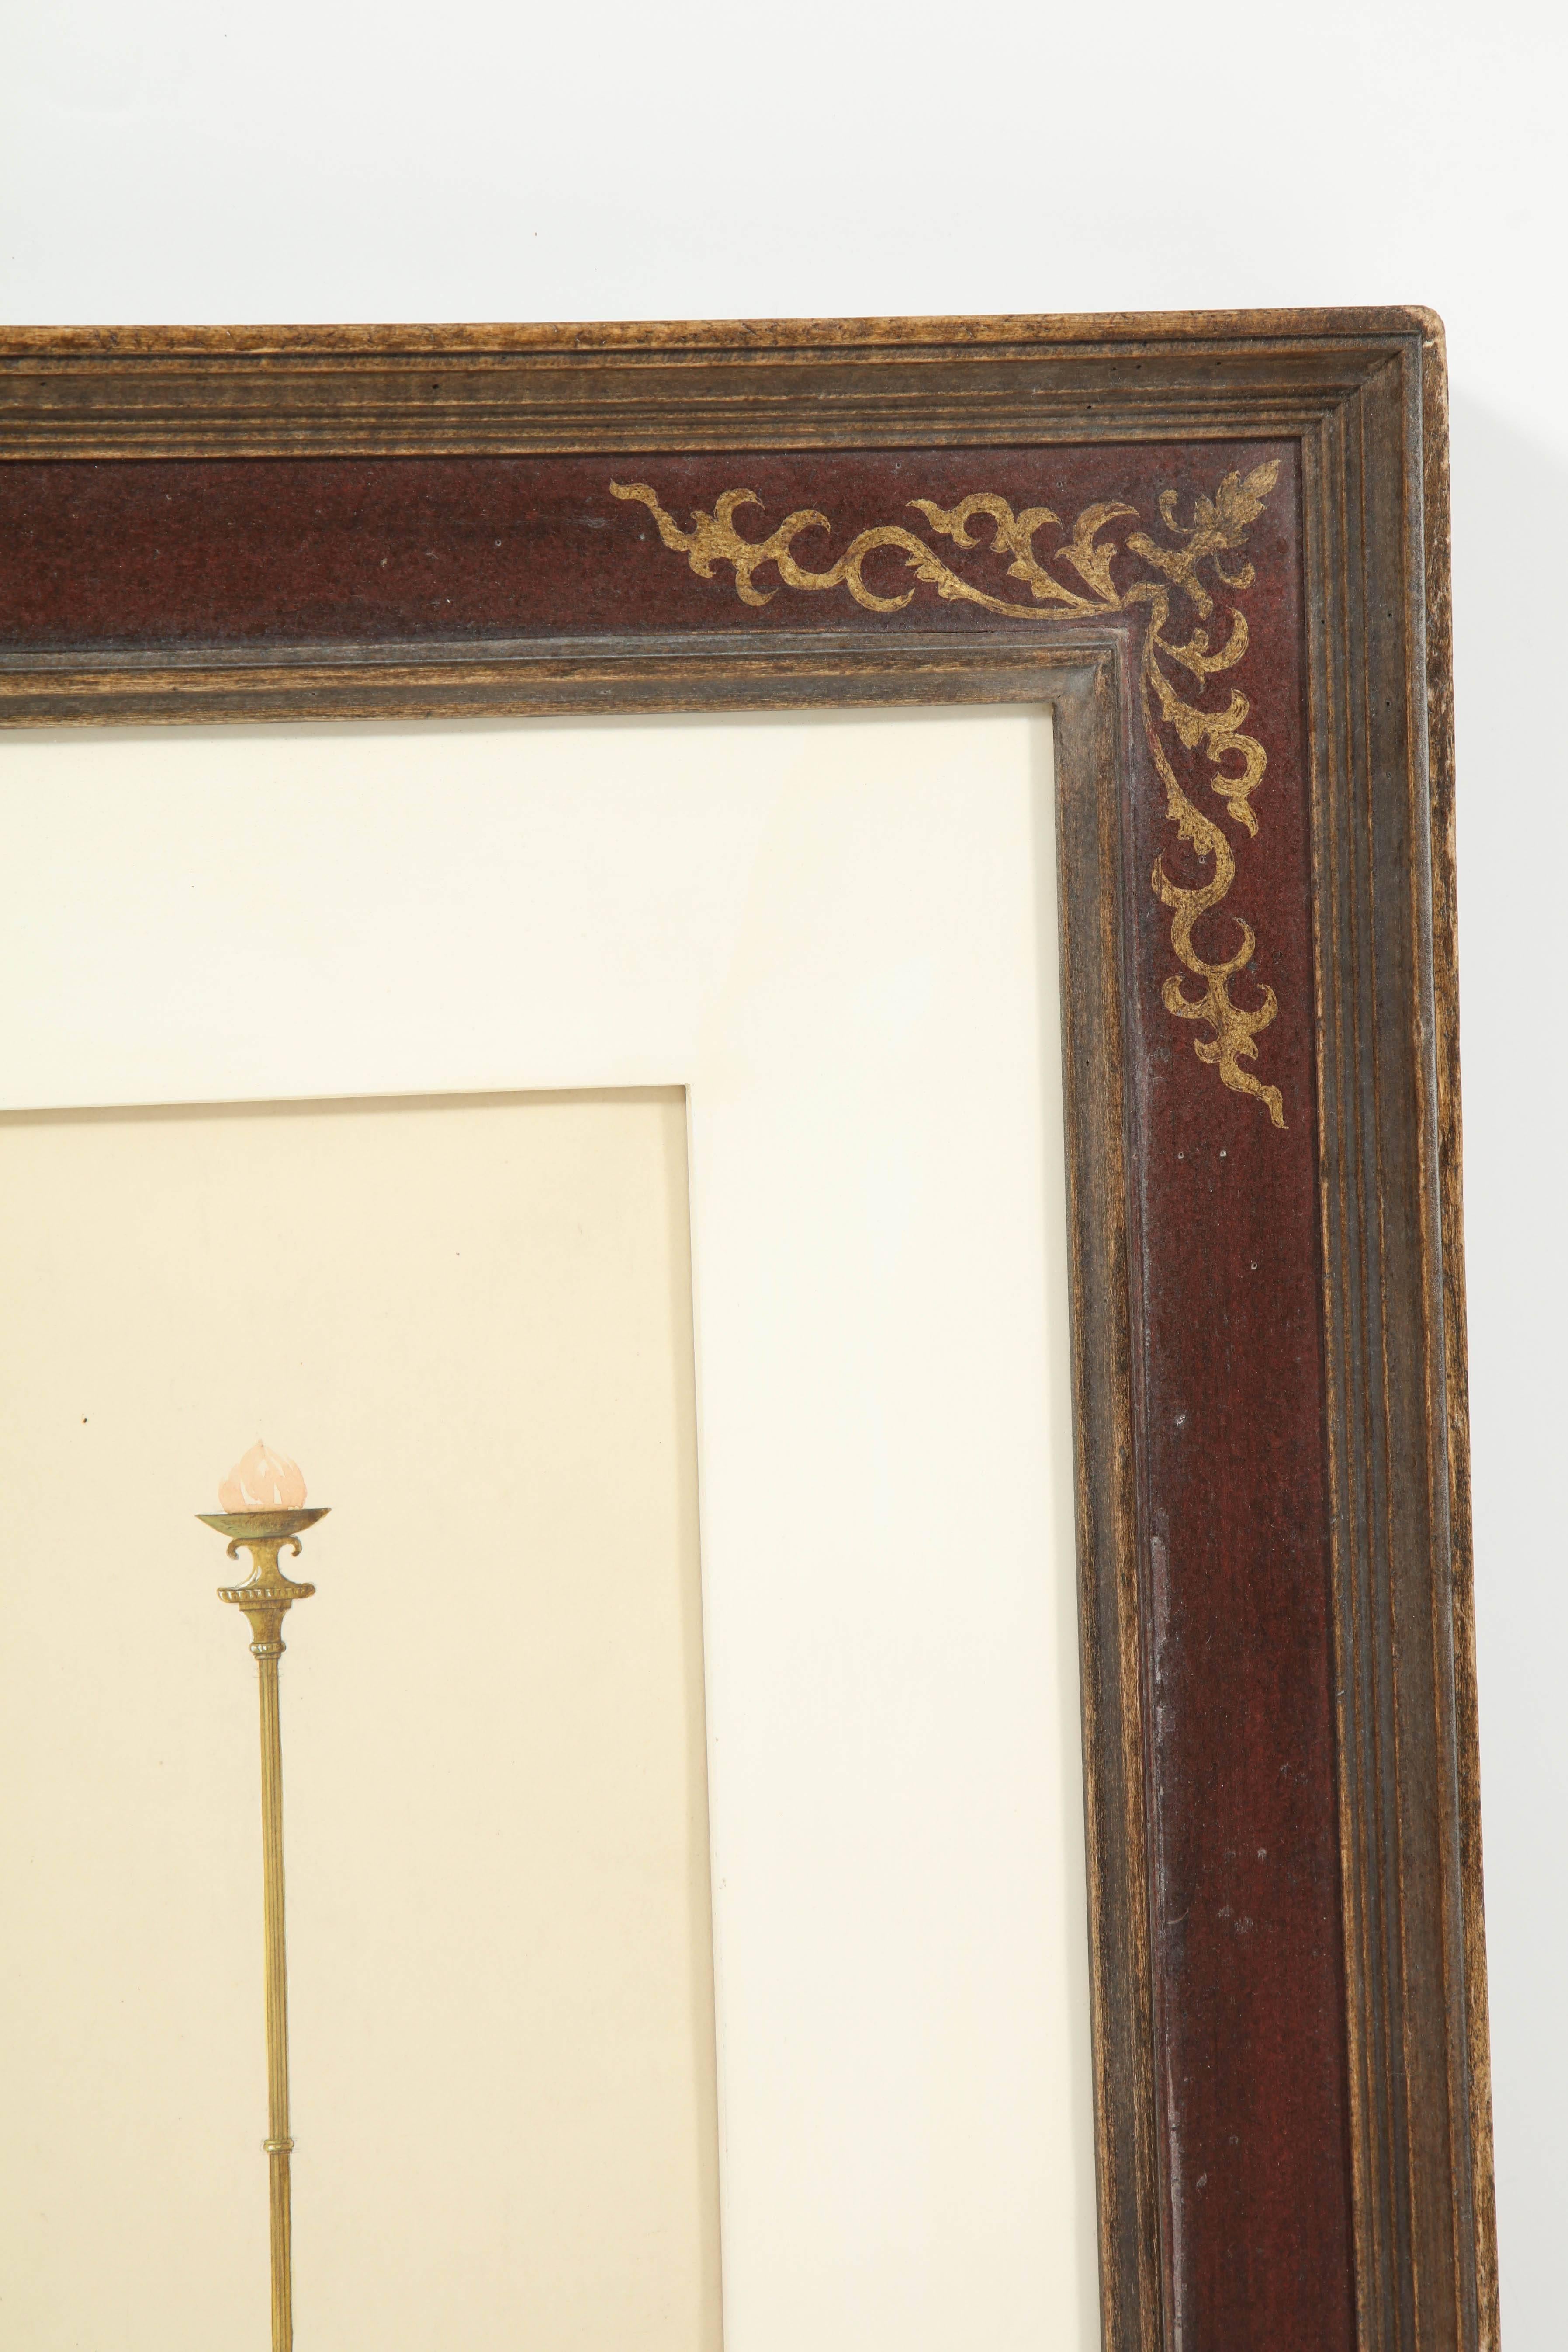 Gouache drawing of a Roman lantern, circa 1920 as framed in an Italian style mahogany frame with gilt corners.